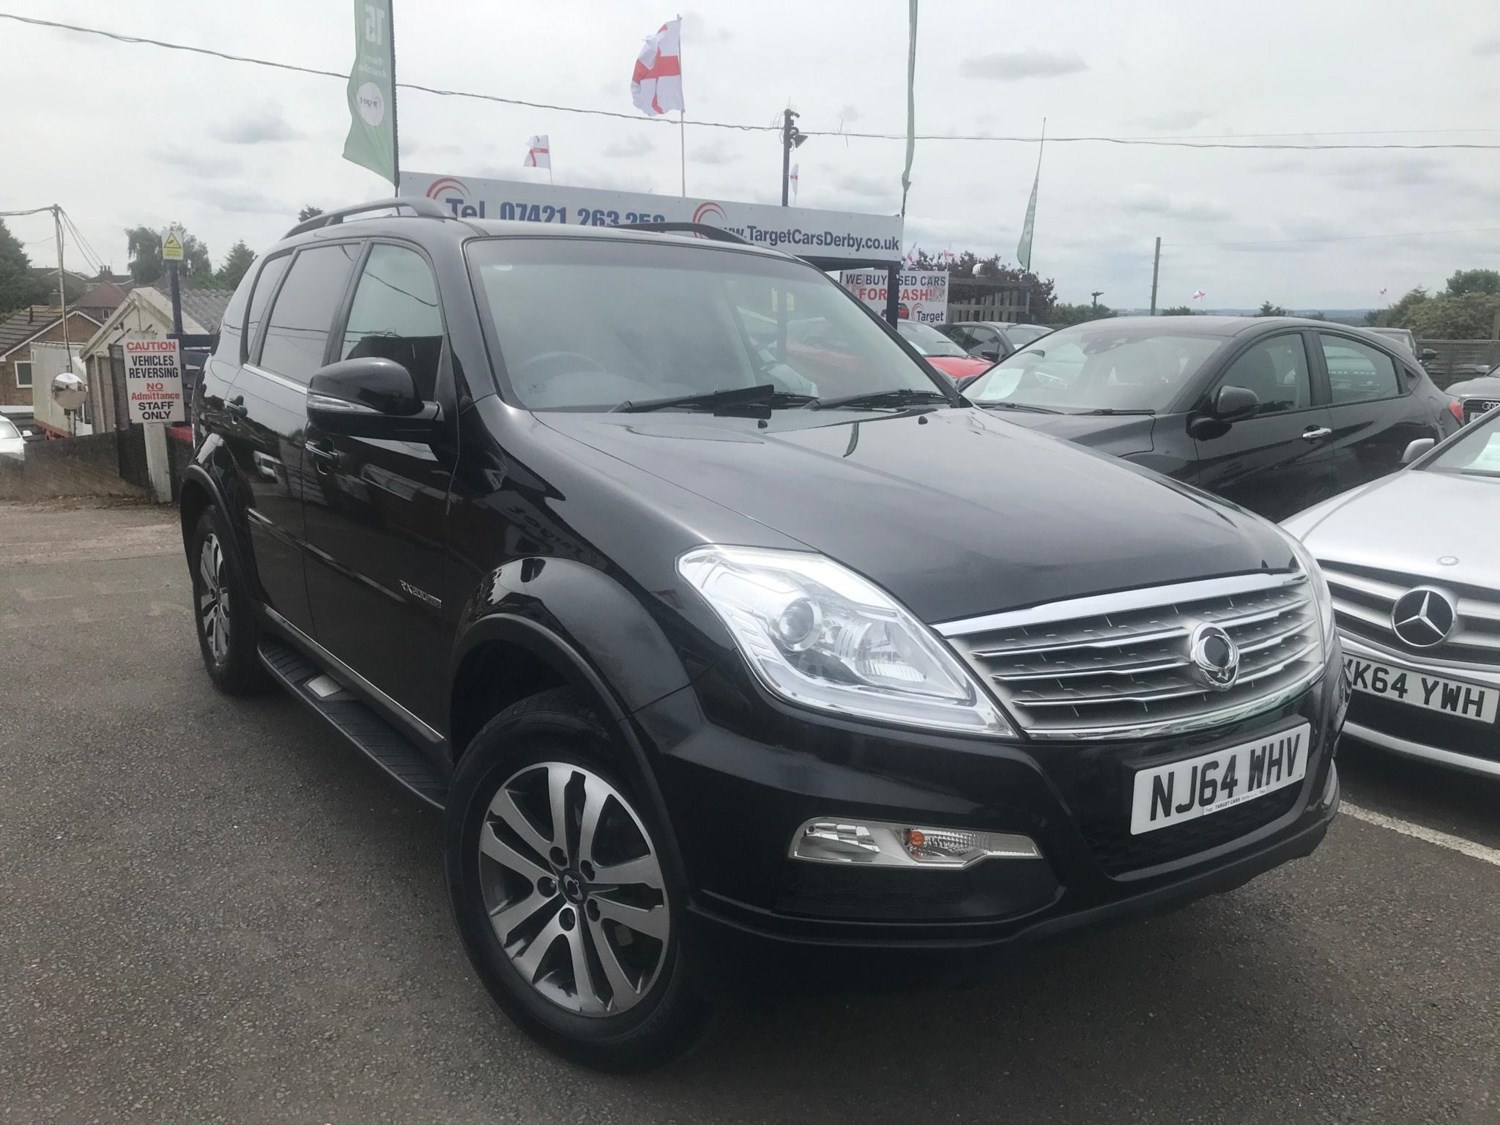 SsangYong Rexton Listing Image